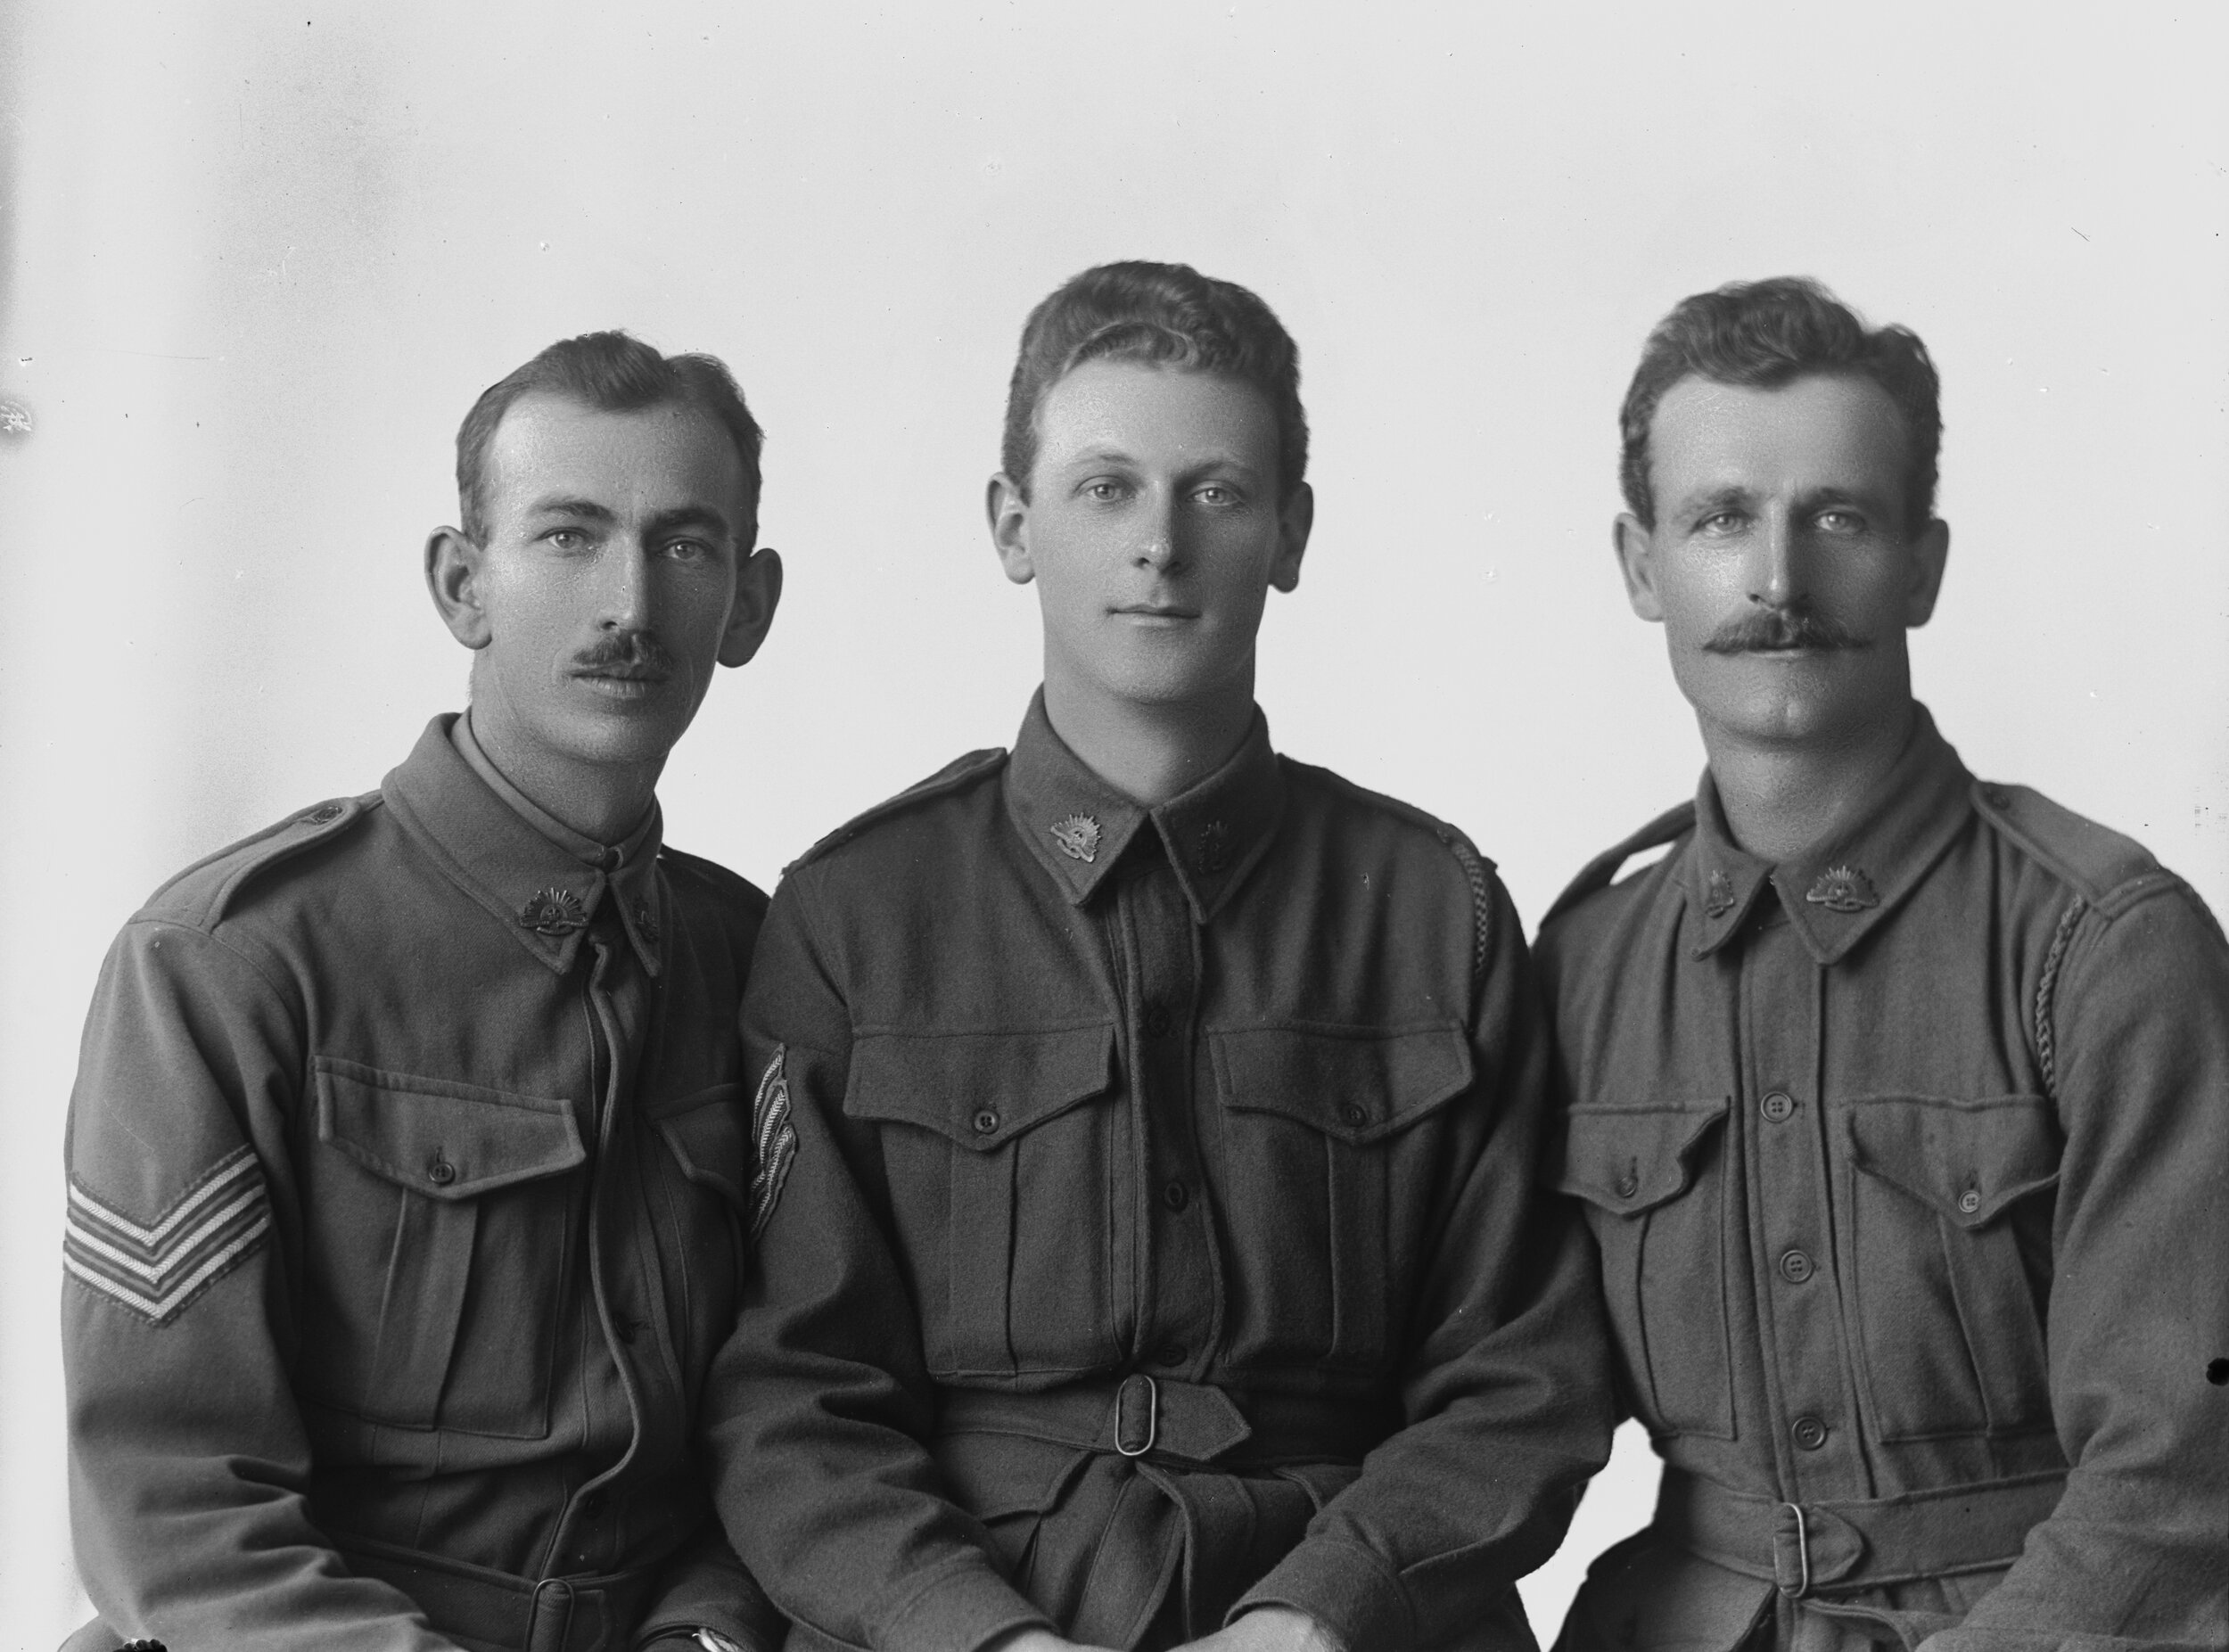 Photographed at the Dease Studio, 117 Barrack Street Perth WA Image courtesy of the State Library of Western Australia: 108373PD